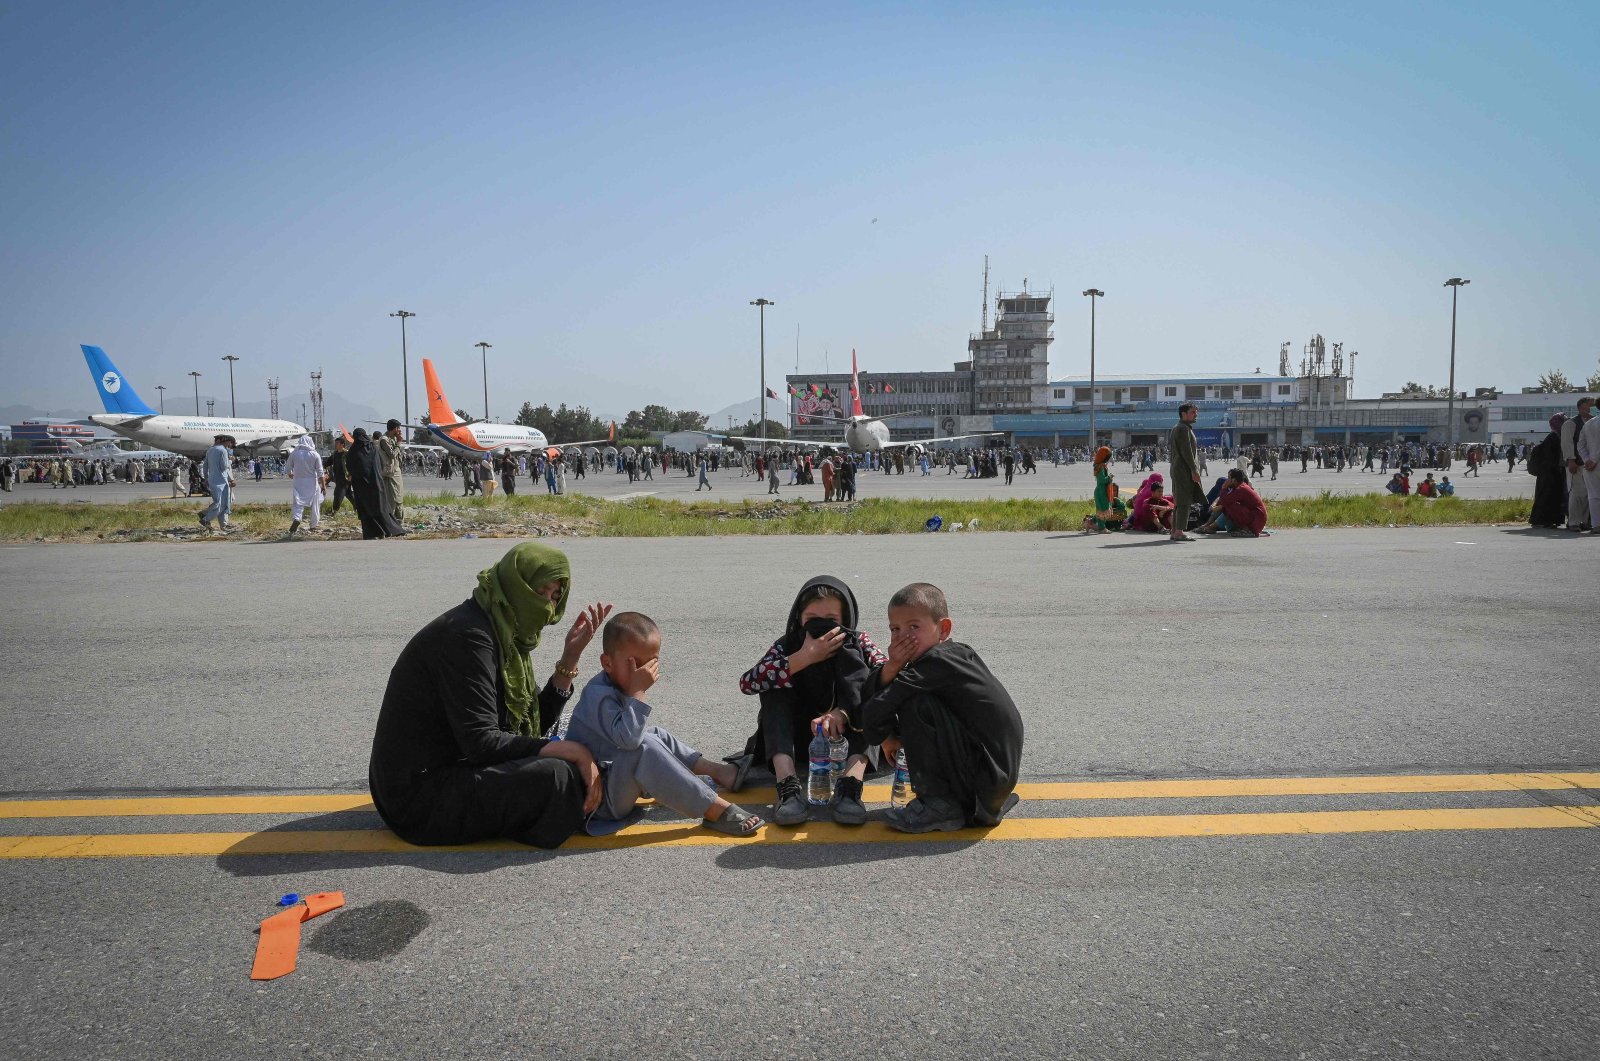 Afghan people sit along the tarmac as they wait to leave the Kabul Hamid Karzai International Airport in Kabul, Afghanistan on Aug. 16, 2021. (AFP Photo)